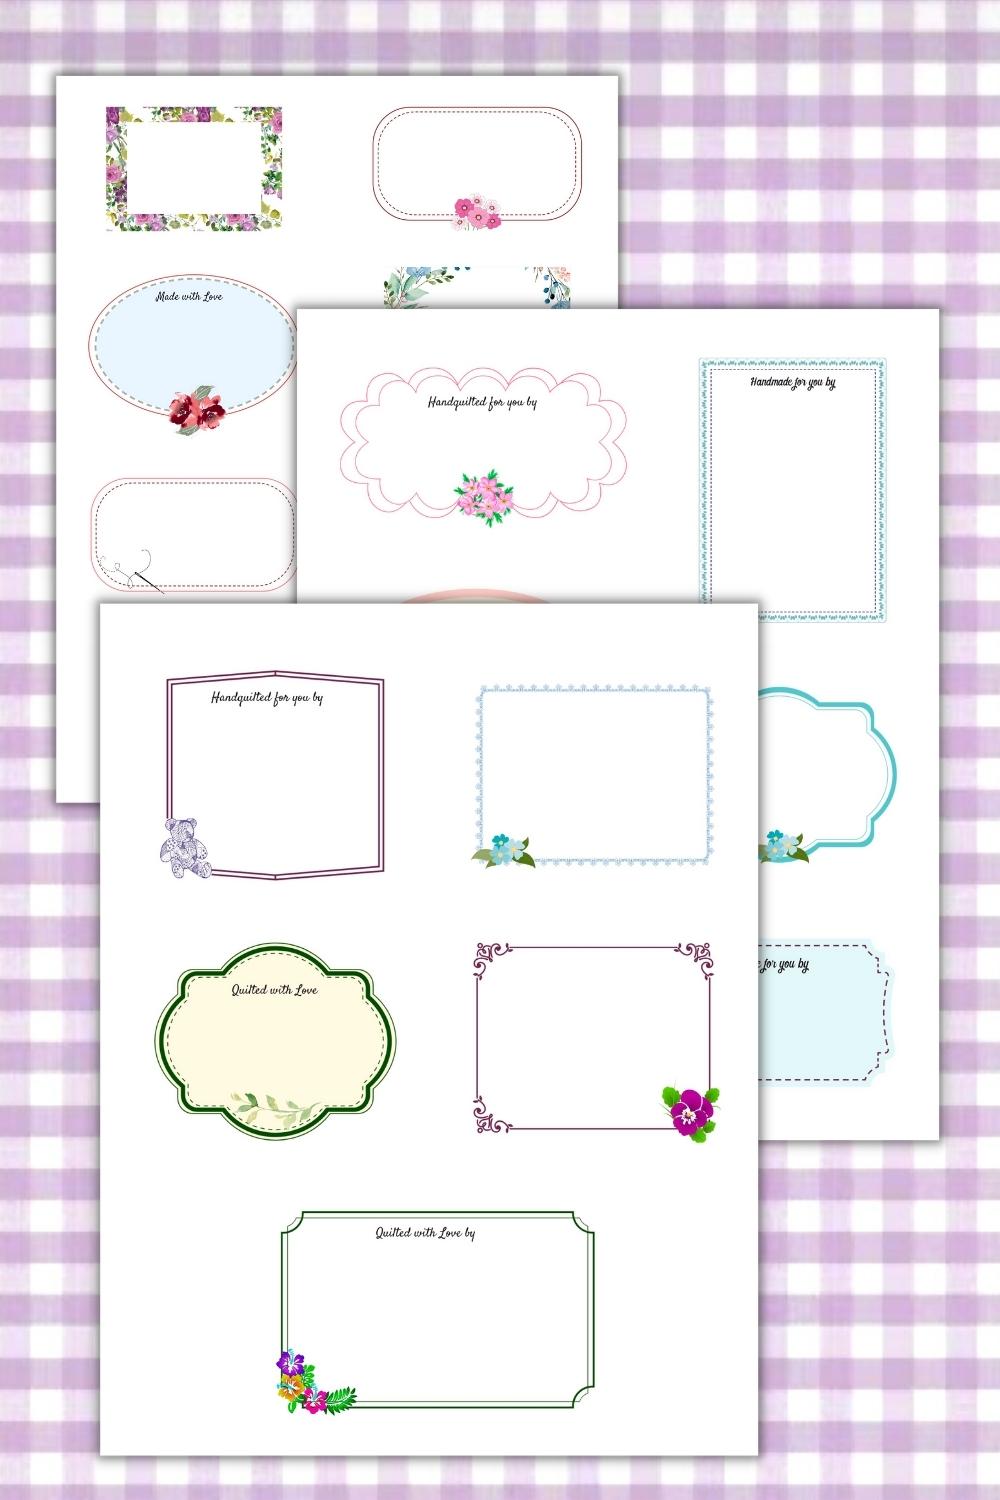 Quick Guide to Designing & Printing Quilt Labels [Sign Up Page